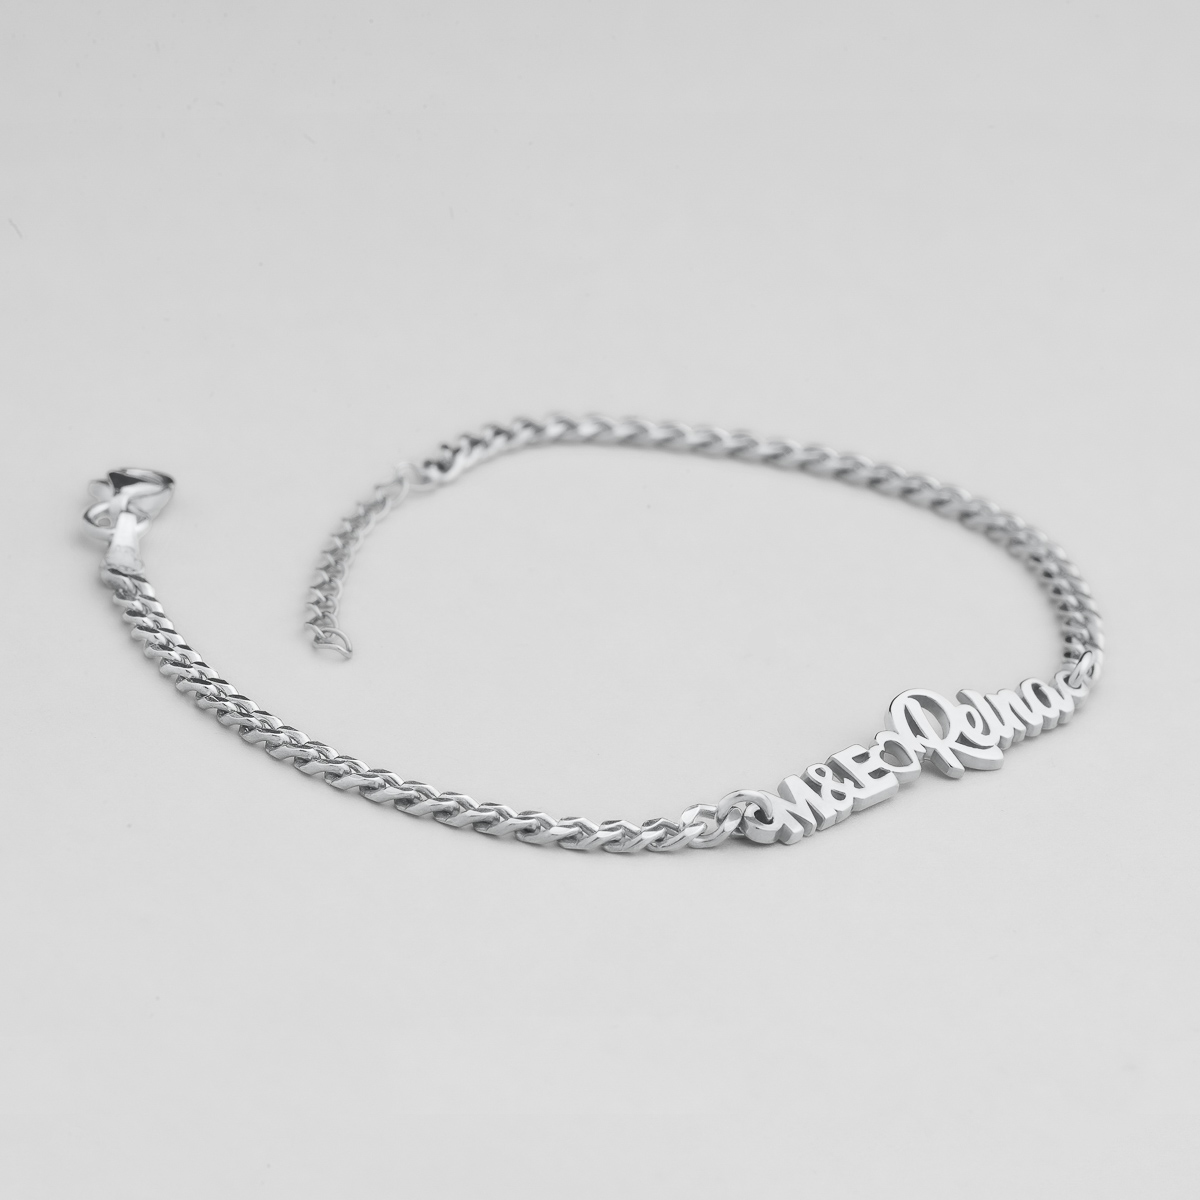 Monogram Bracelet Sterling Silver with or without Gold Plate center